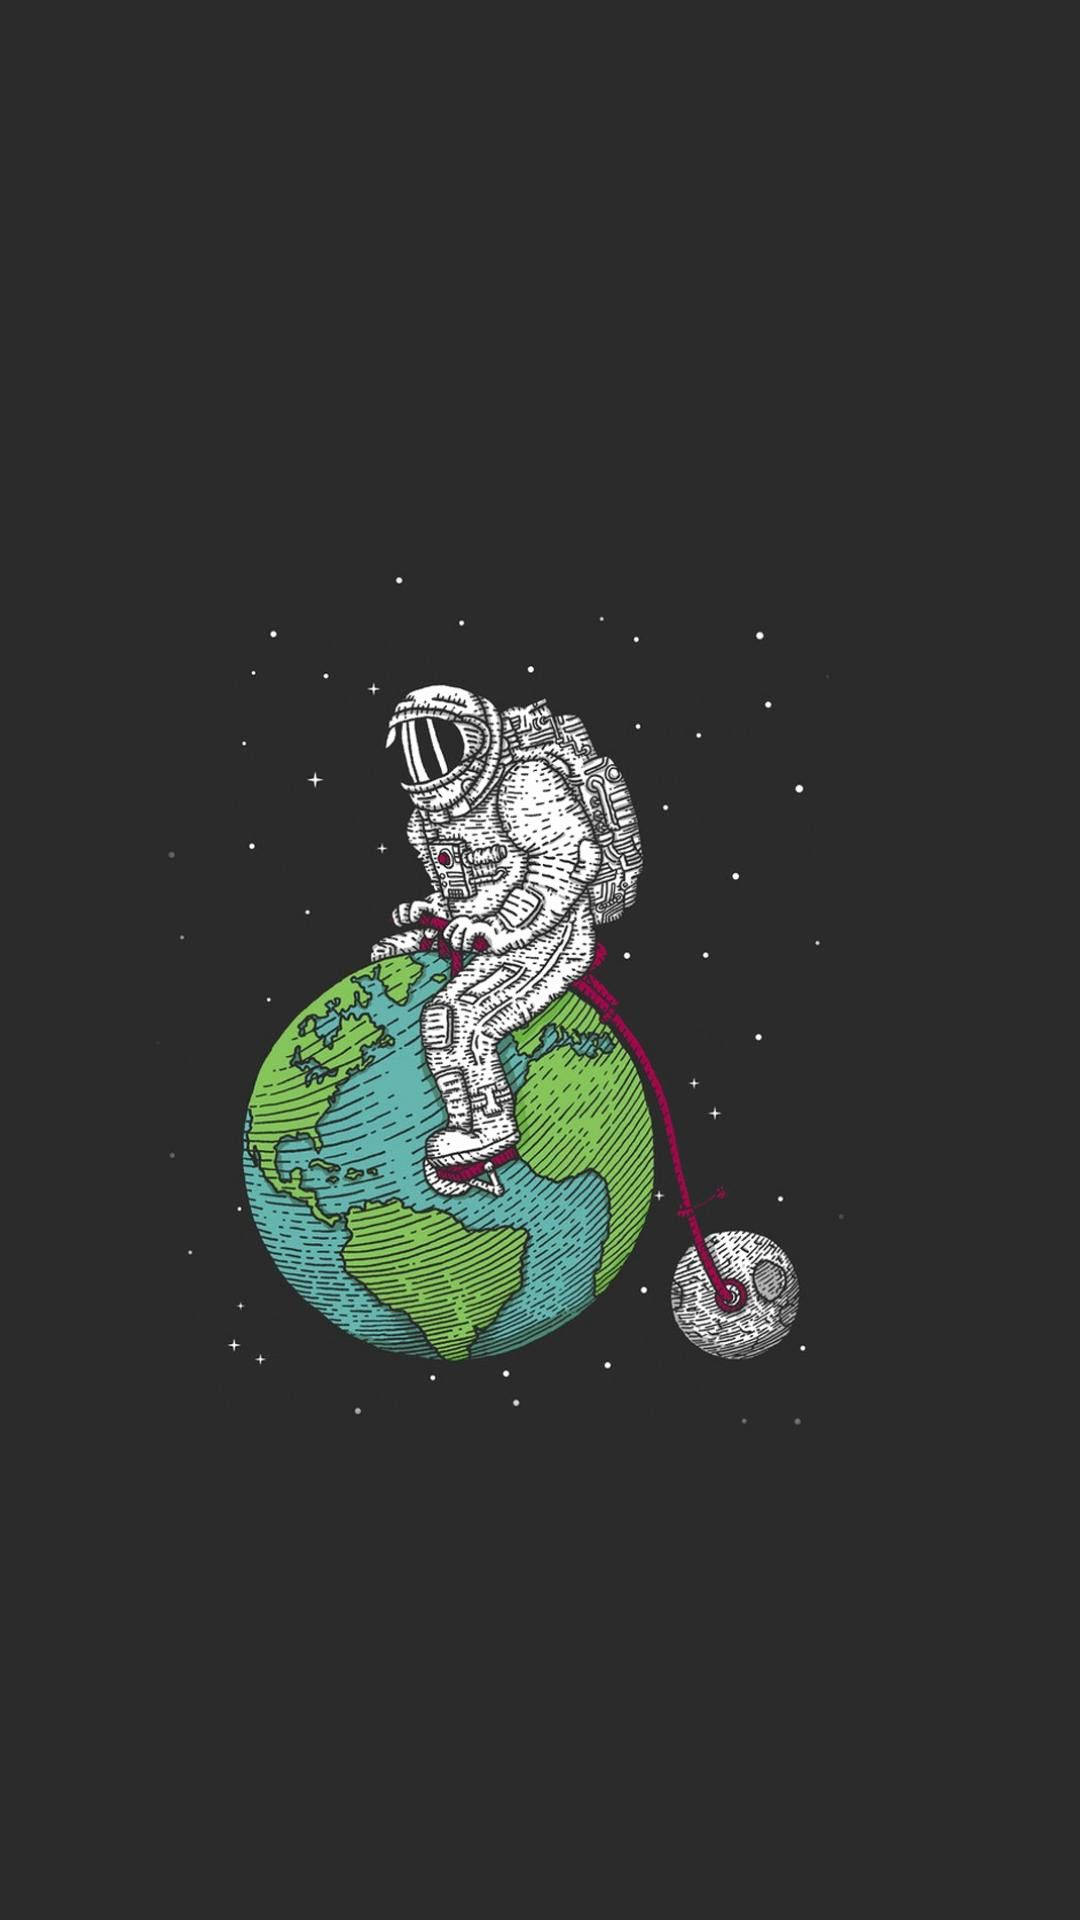 Clever Astronaut Cycling Background